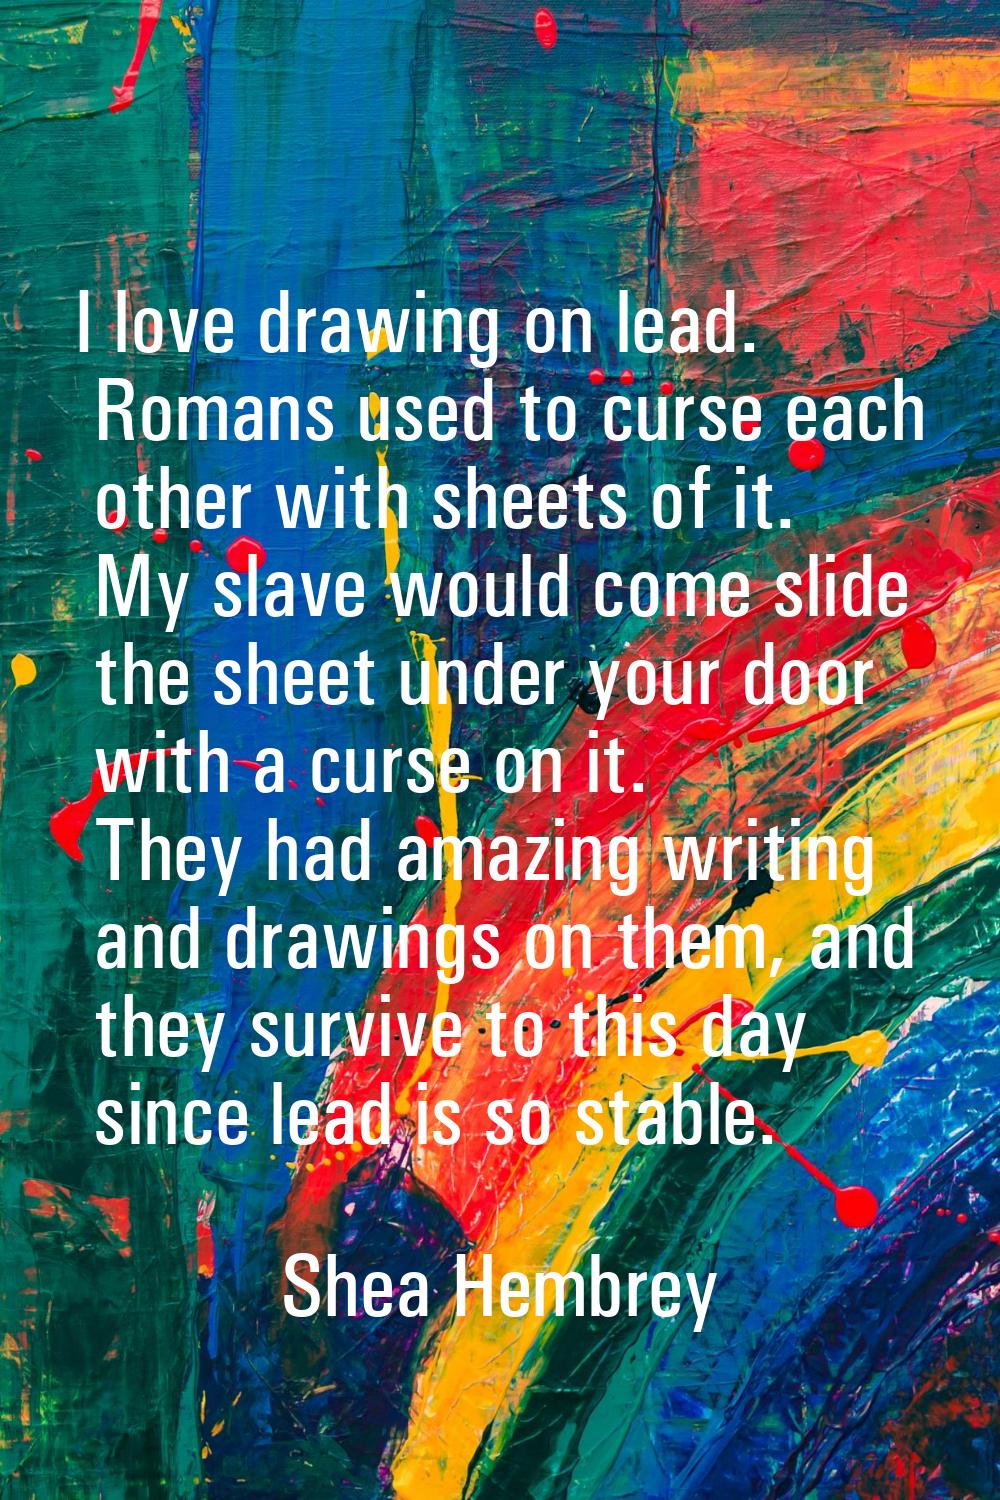 I love drawing on lead. Romans used to curse each other with sheets of it. My slave would come slid